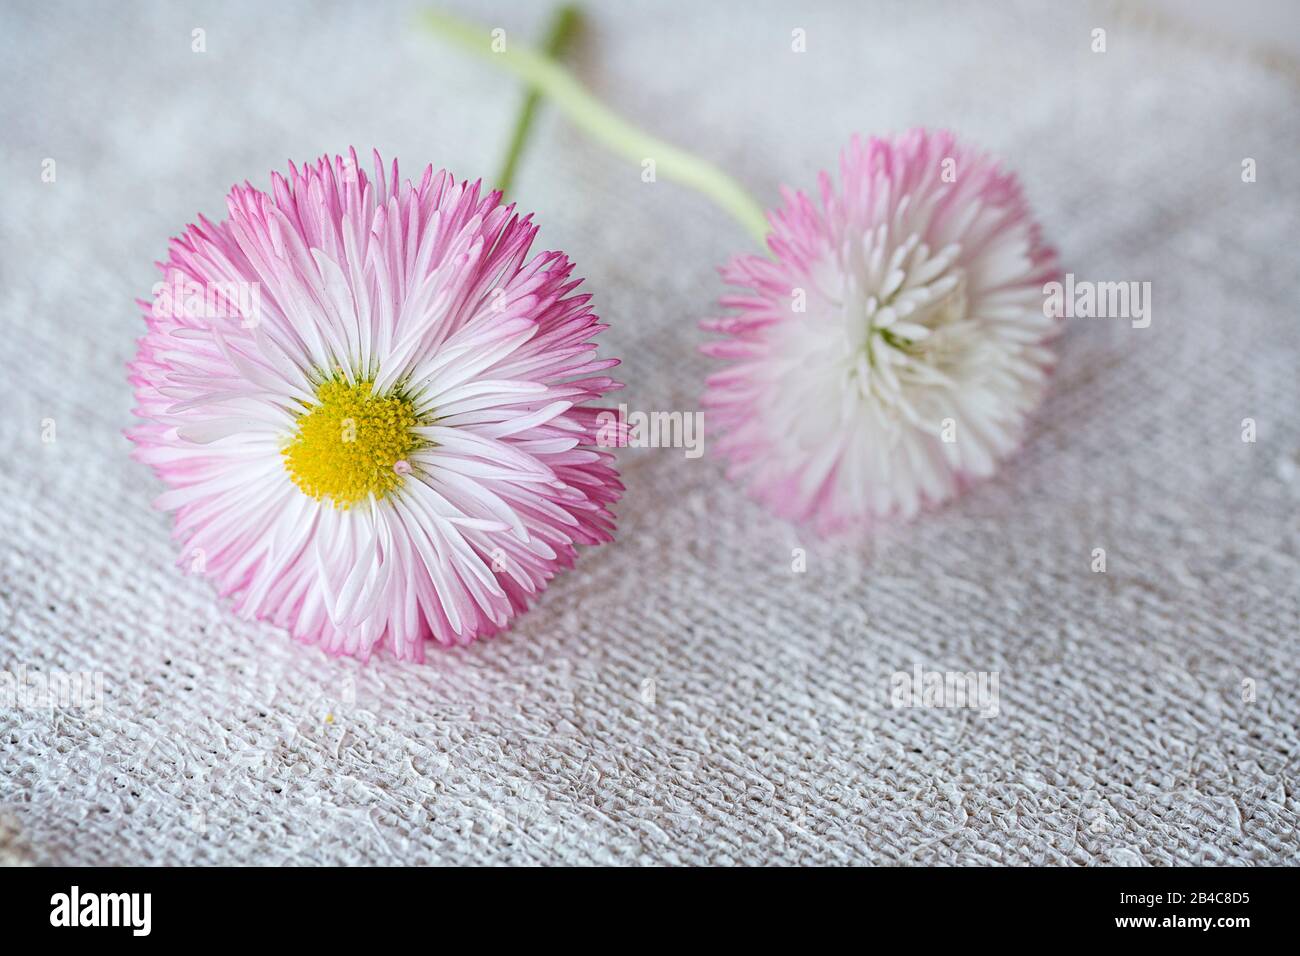 close up of pink daisy flowers on white burlap texture Stock Photo